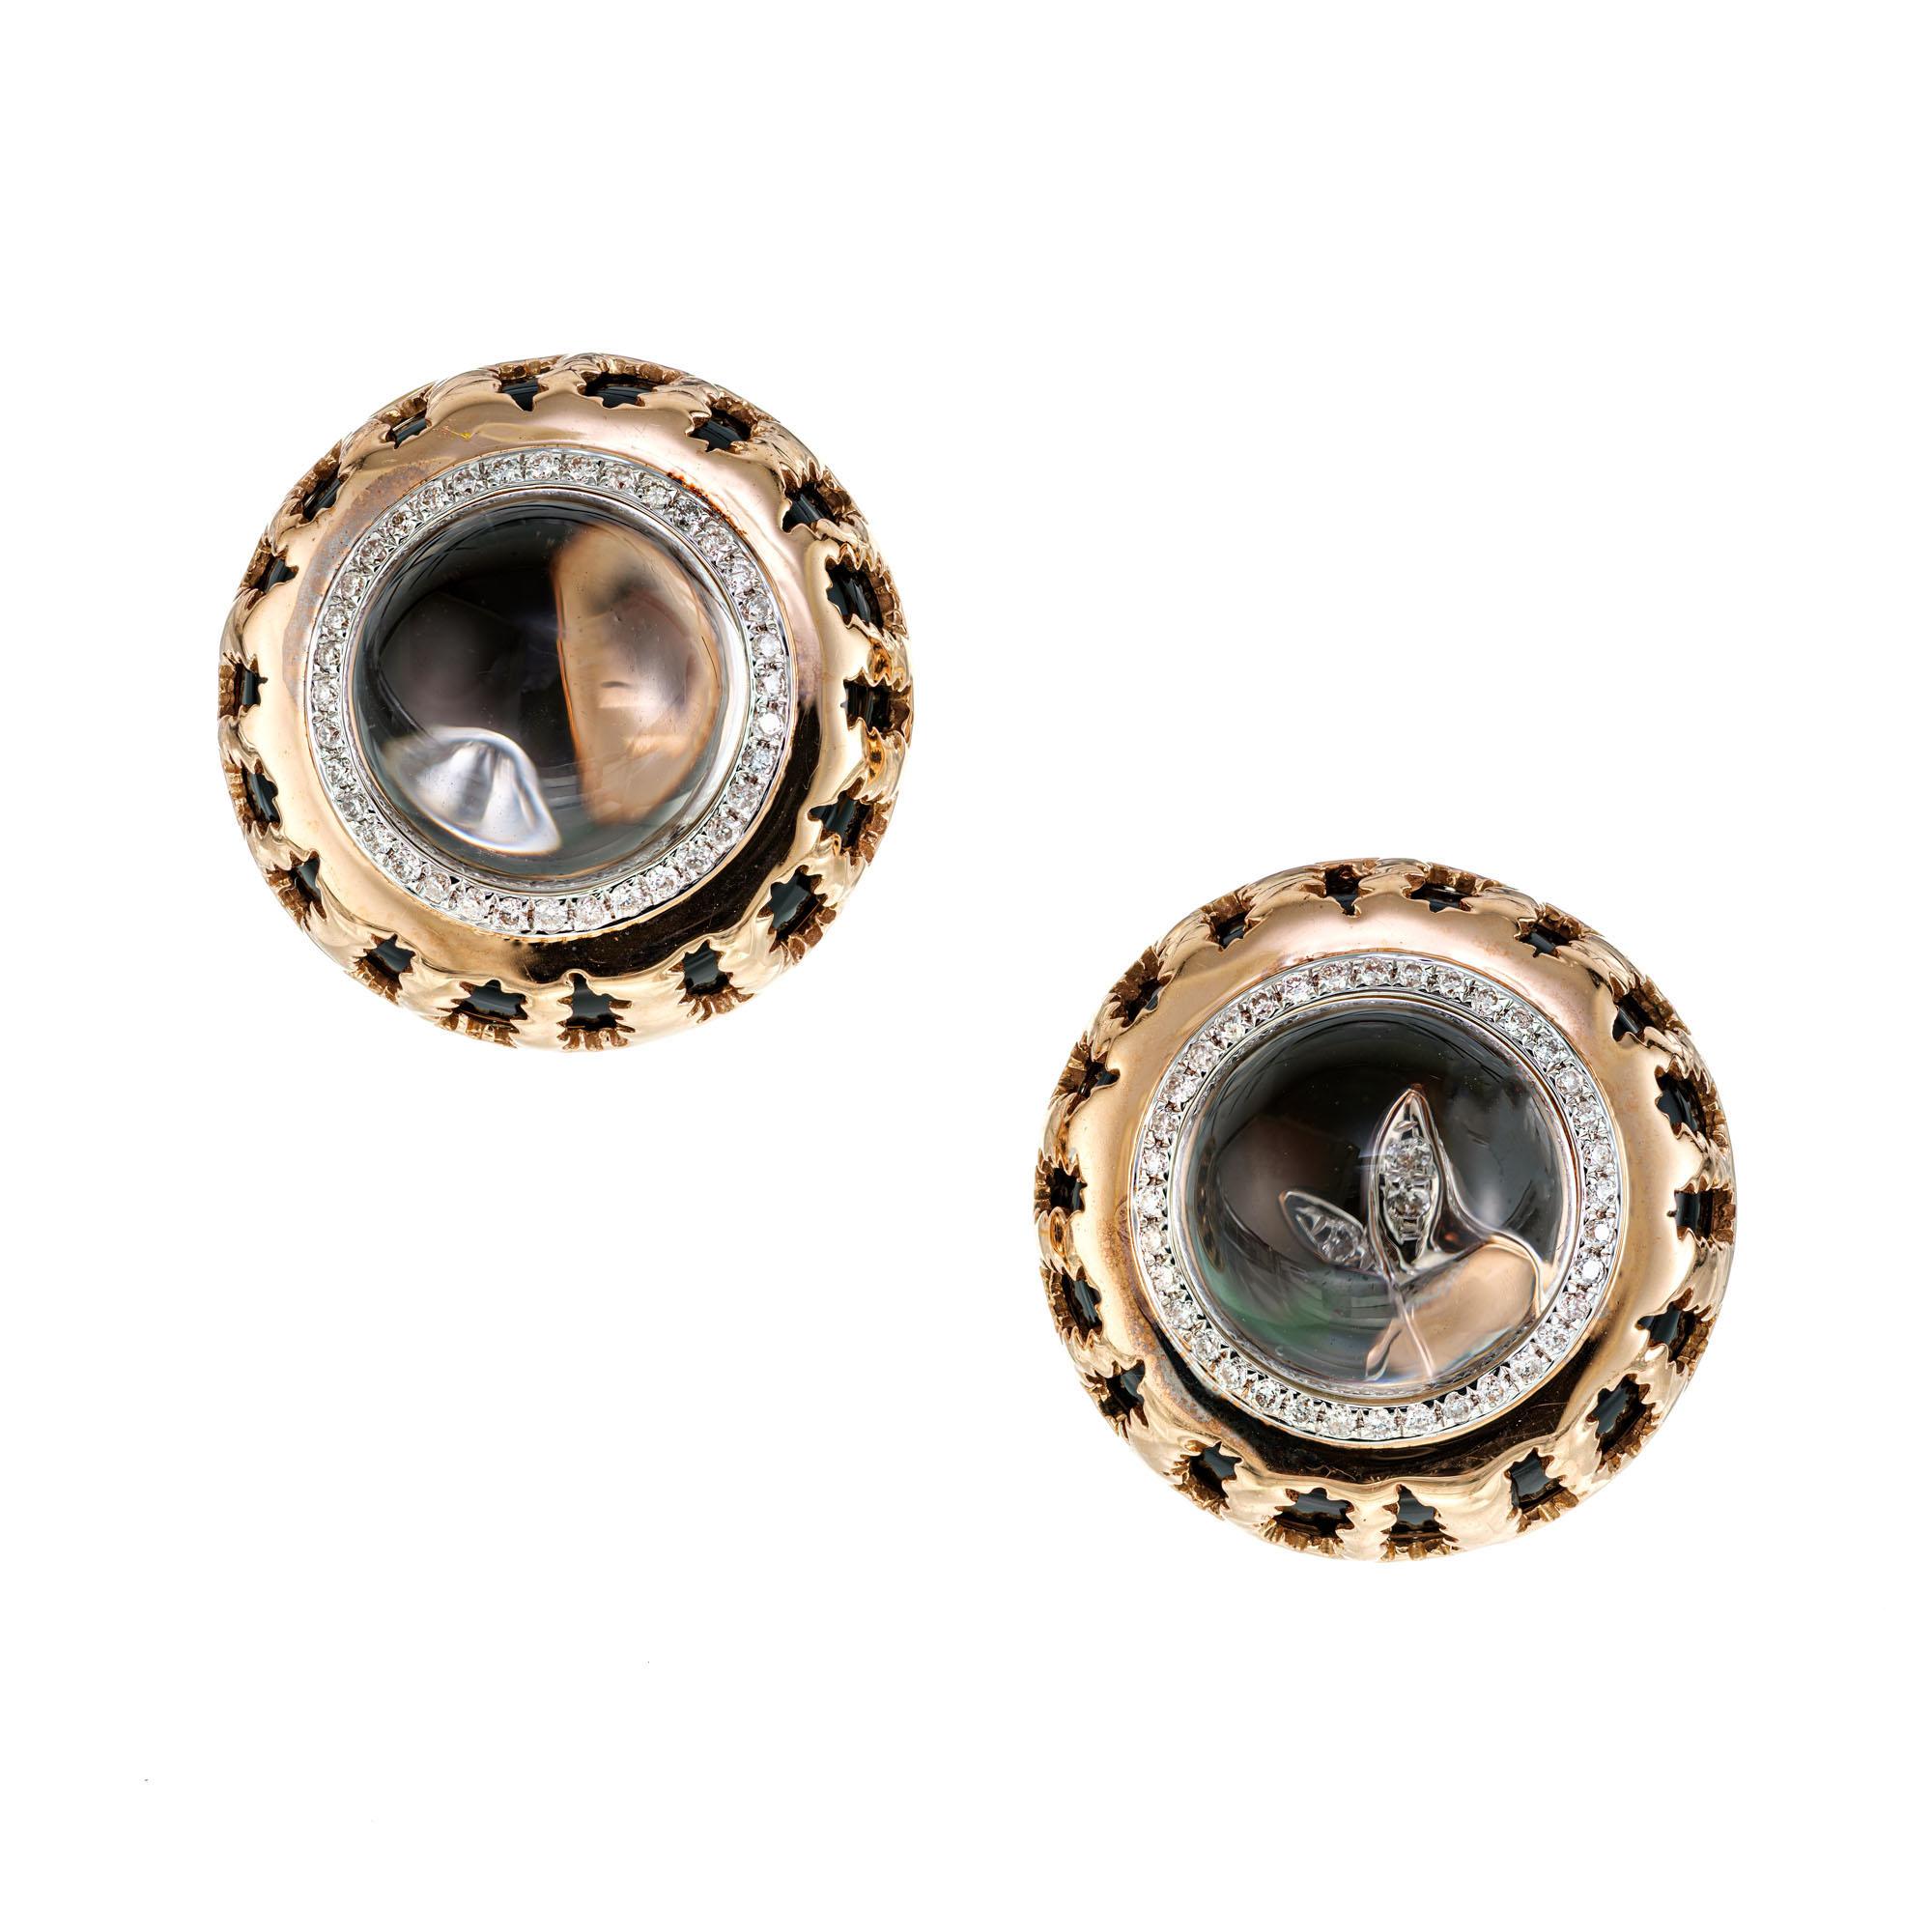 Quartz crystal cabochon earrings in 14k rose gold with a white gold diamond halo and cut out base with a black Onyx interior. Clip and post style. 

2 round crystal clear cabochon Quartz, 10.5mm VS
72 round full cut diamonds, approx. total weight